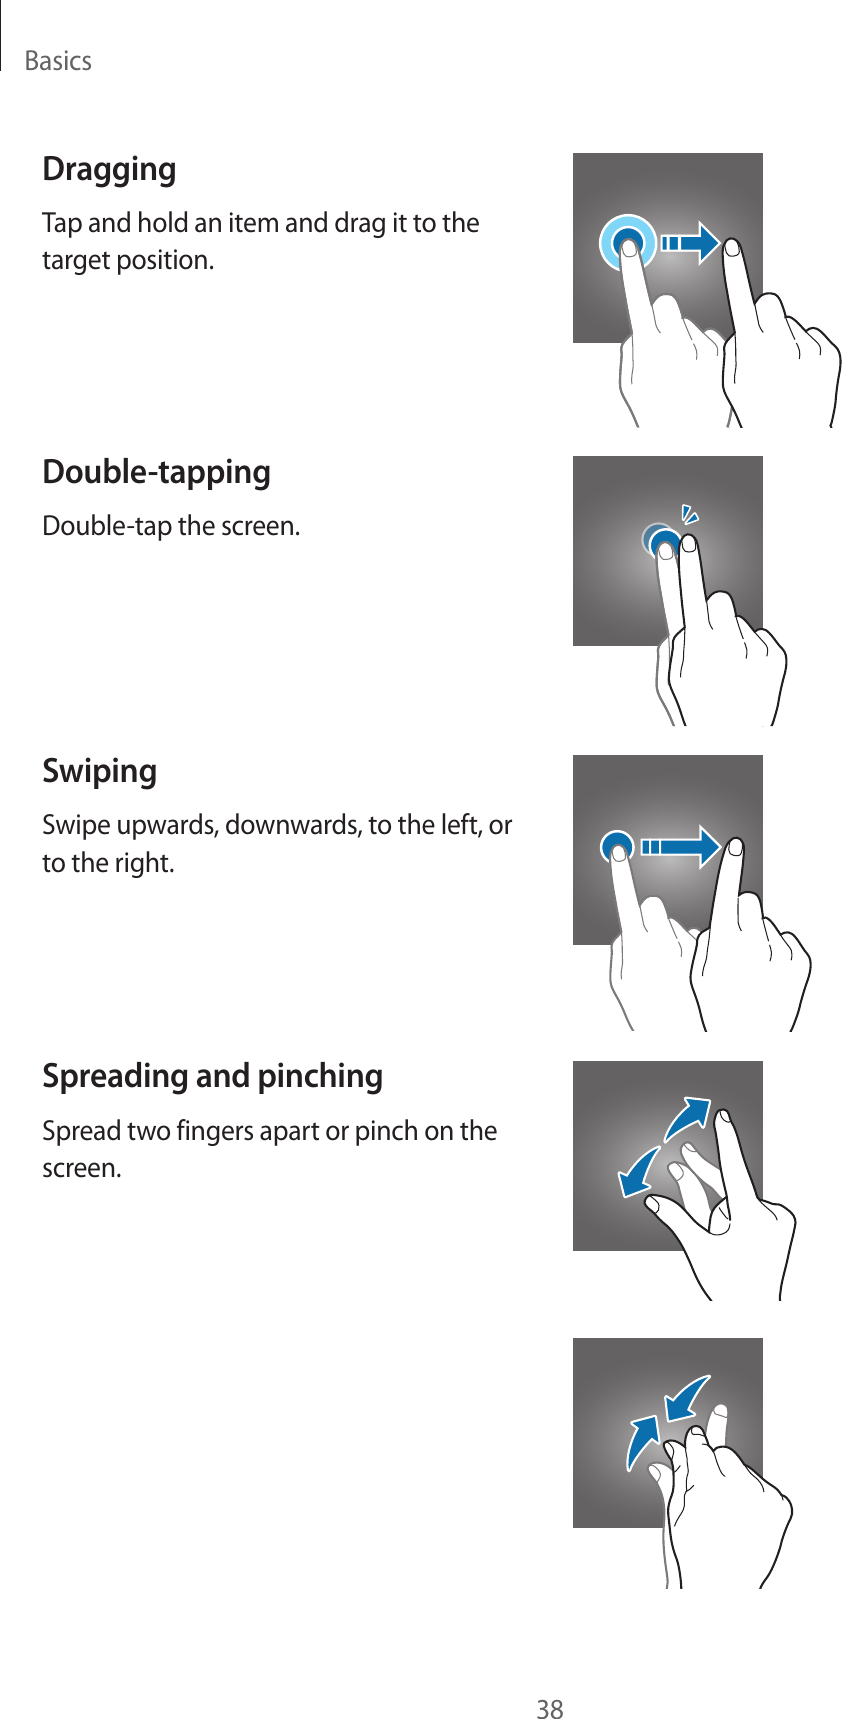 Basics38DraggingTap and hold an item and drag it to the target position.Double-tappingDouble-tap the screen.SwipingSwipe upwards, downwards, to the left, or to the right.Spreading and pinchingSpread two fingers apart or pinch on the screen.